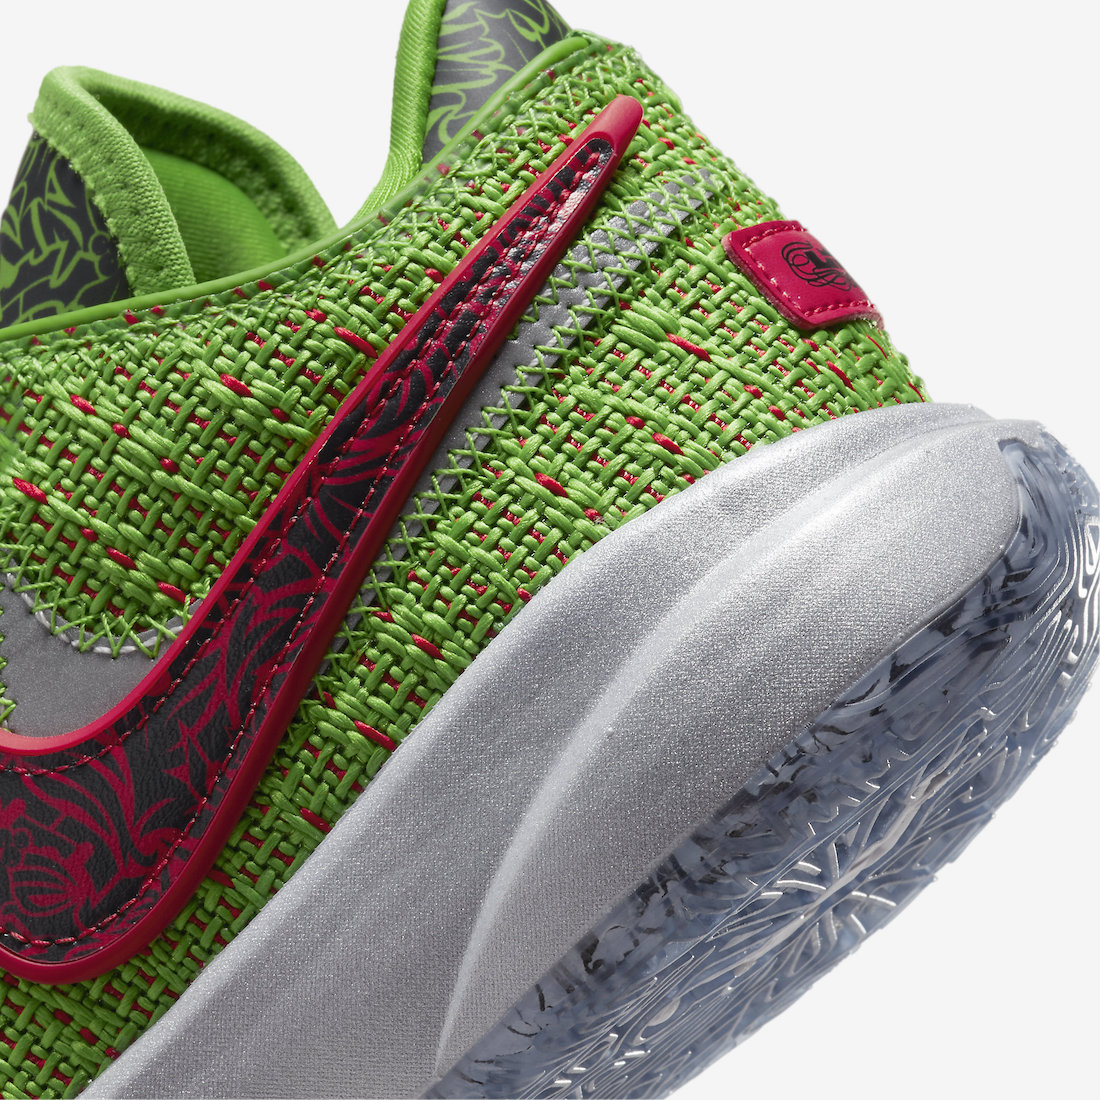 Nike LeBron 20 Christmas GS DQ8646-300 Release Date